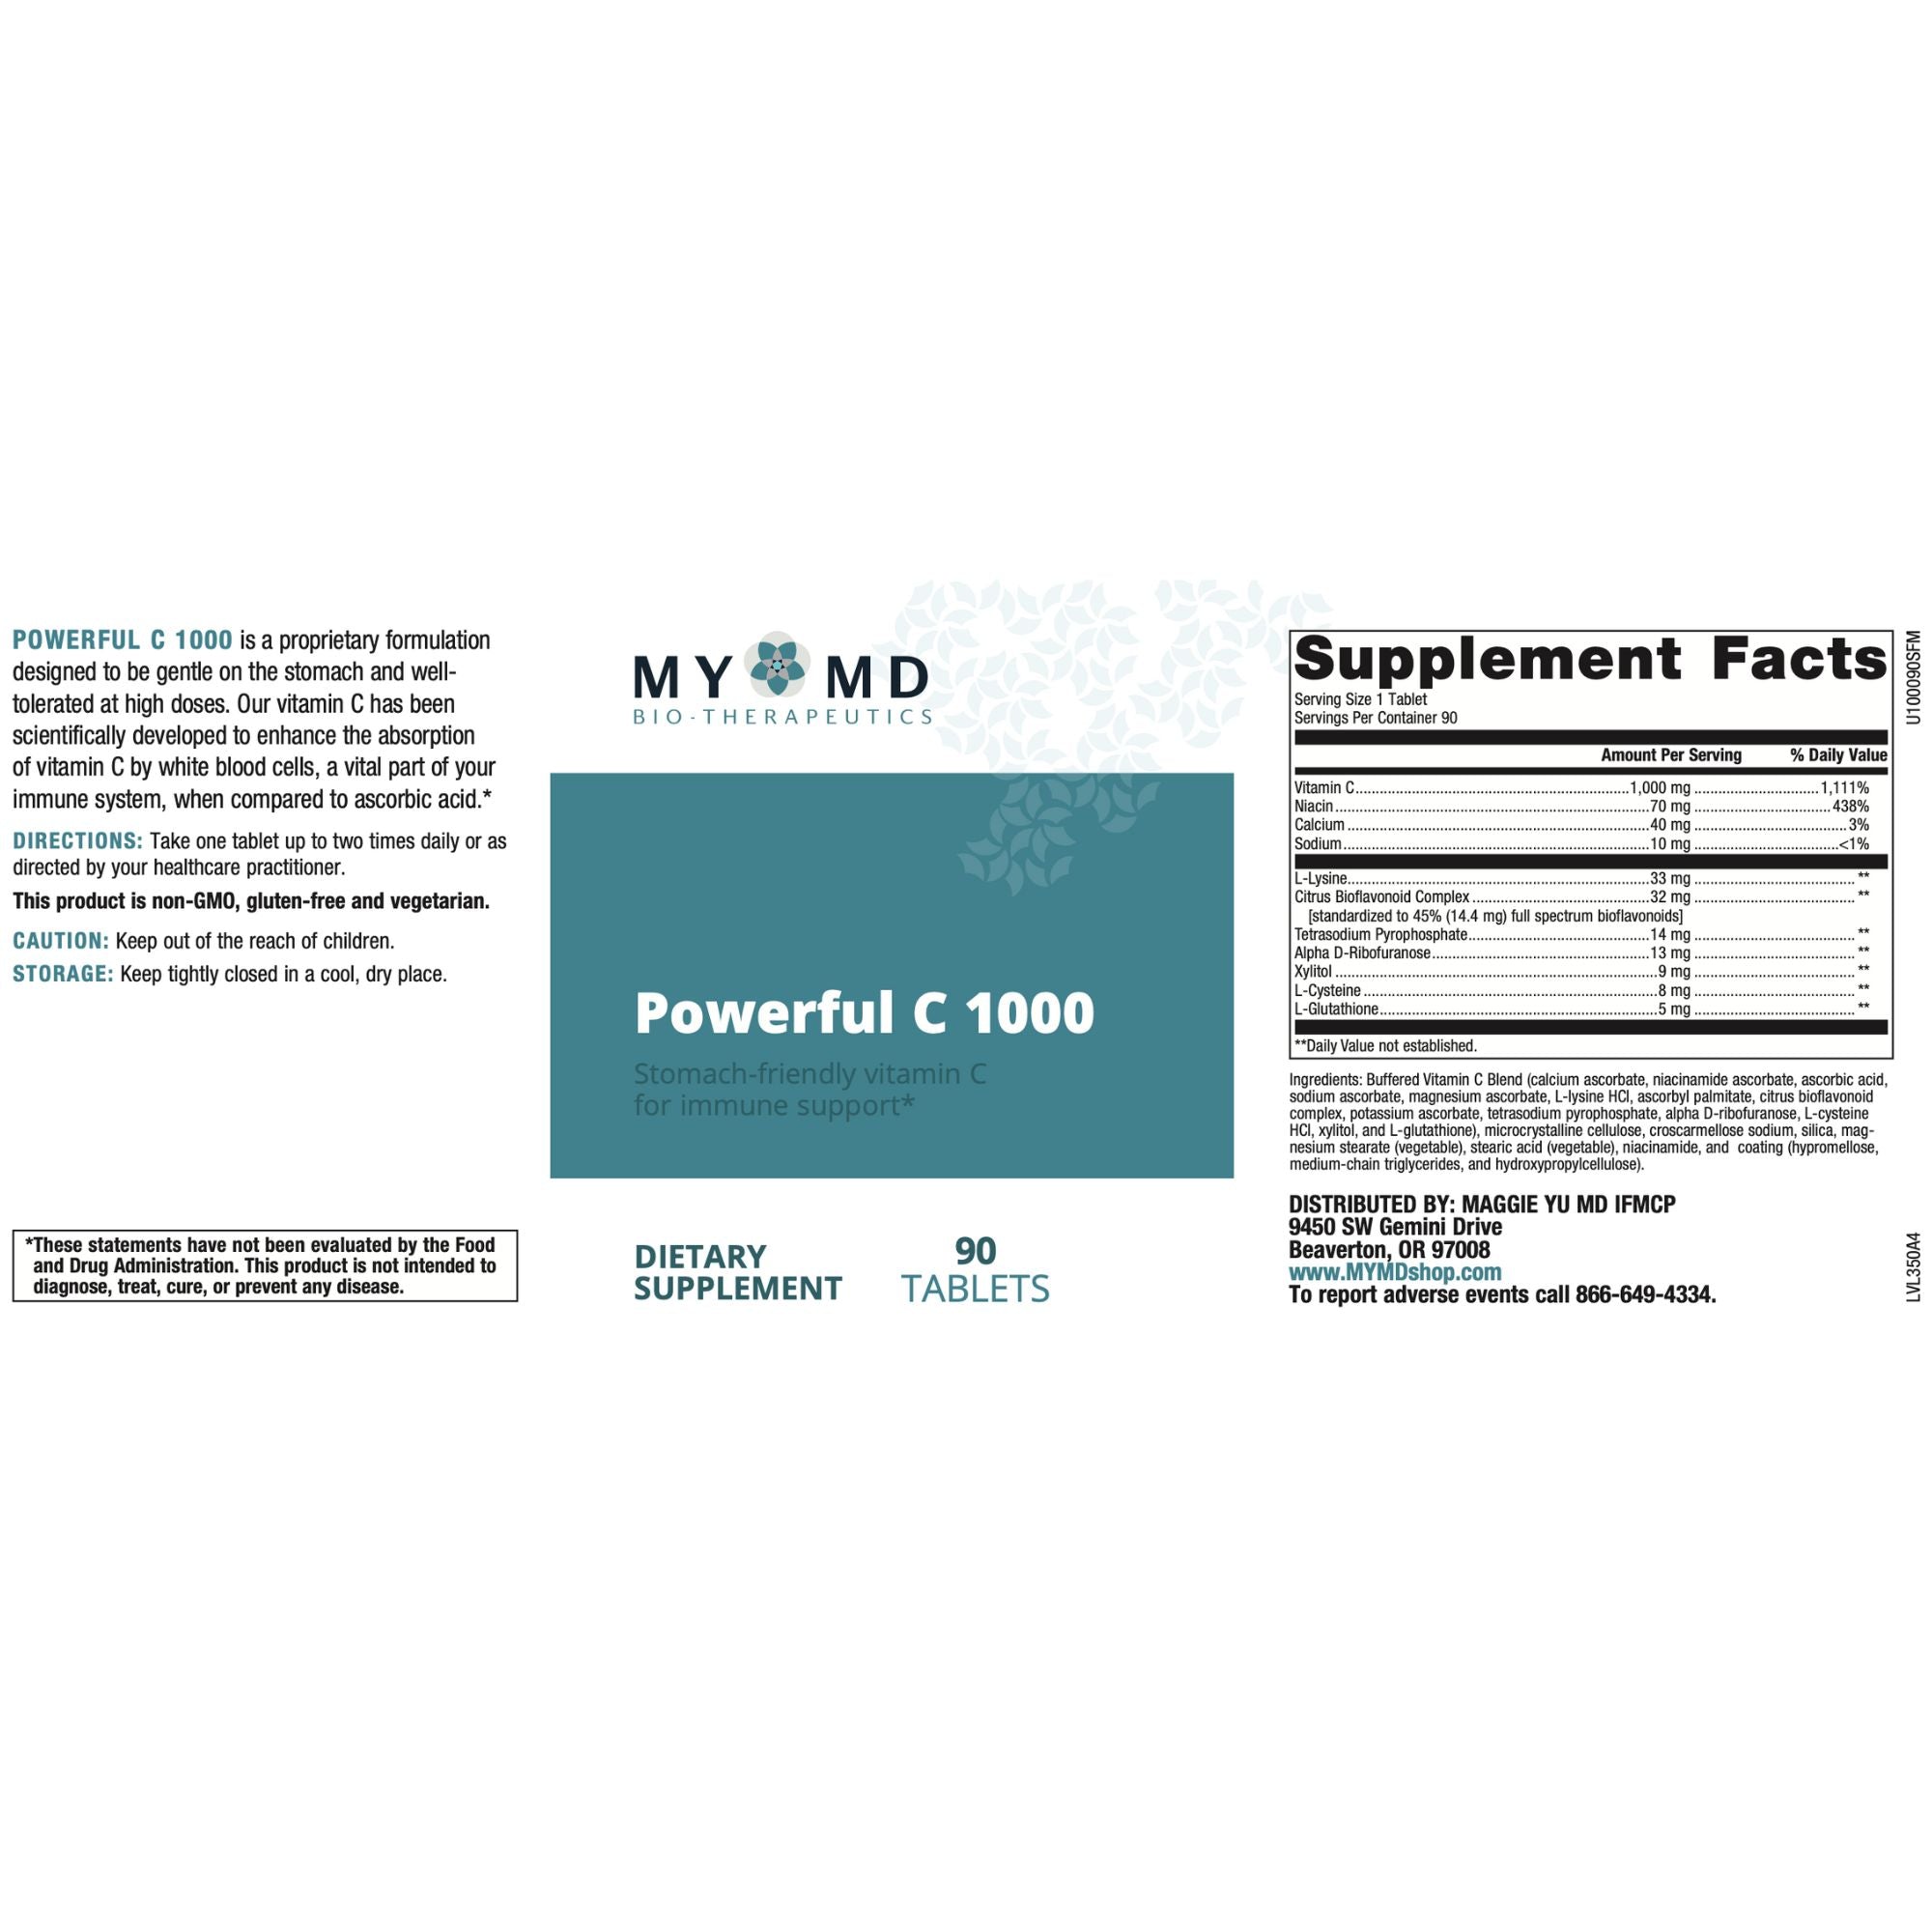 POWERFUL C 1000 - Highly absorbable and tolerated Vitamin C